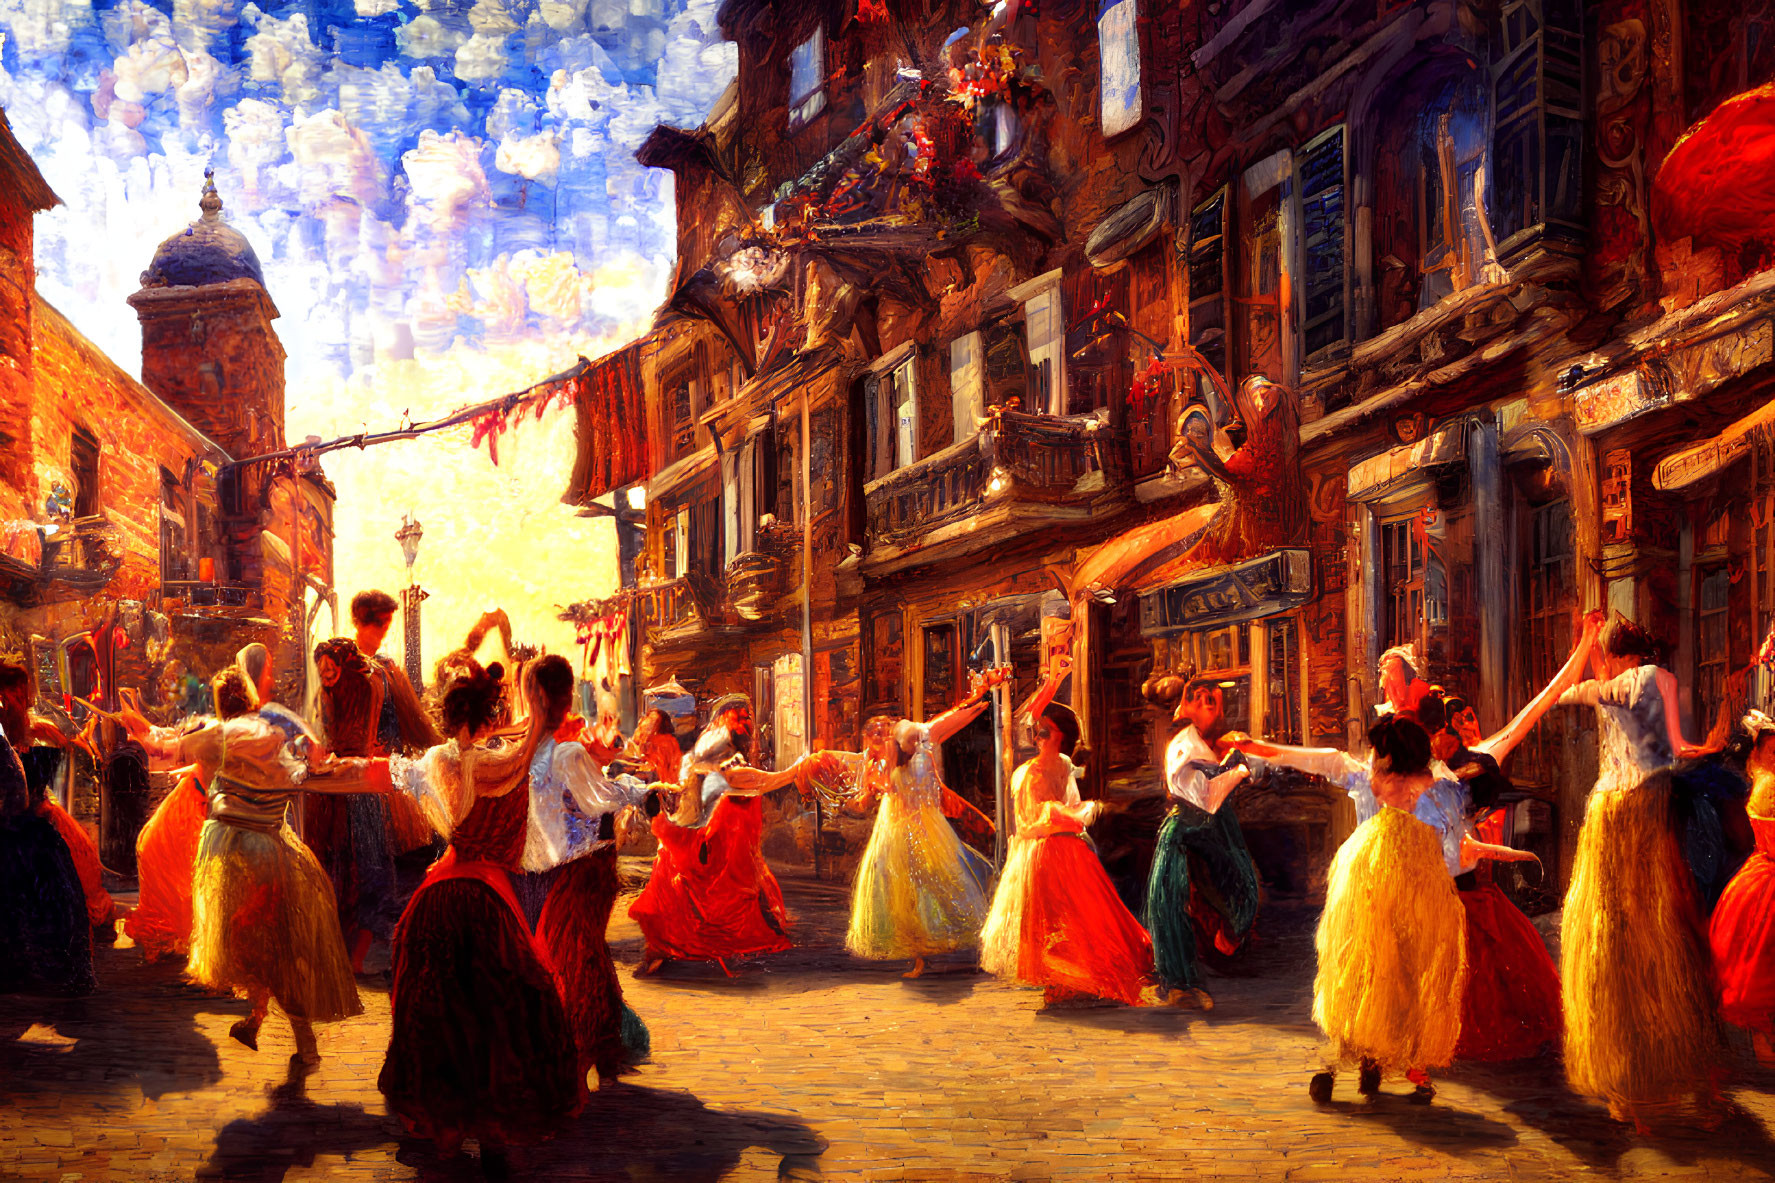 Traditional attire dancers in vibrant street scene at sunset